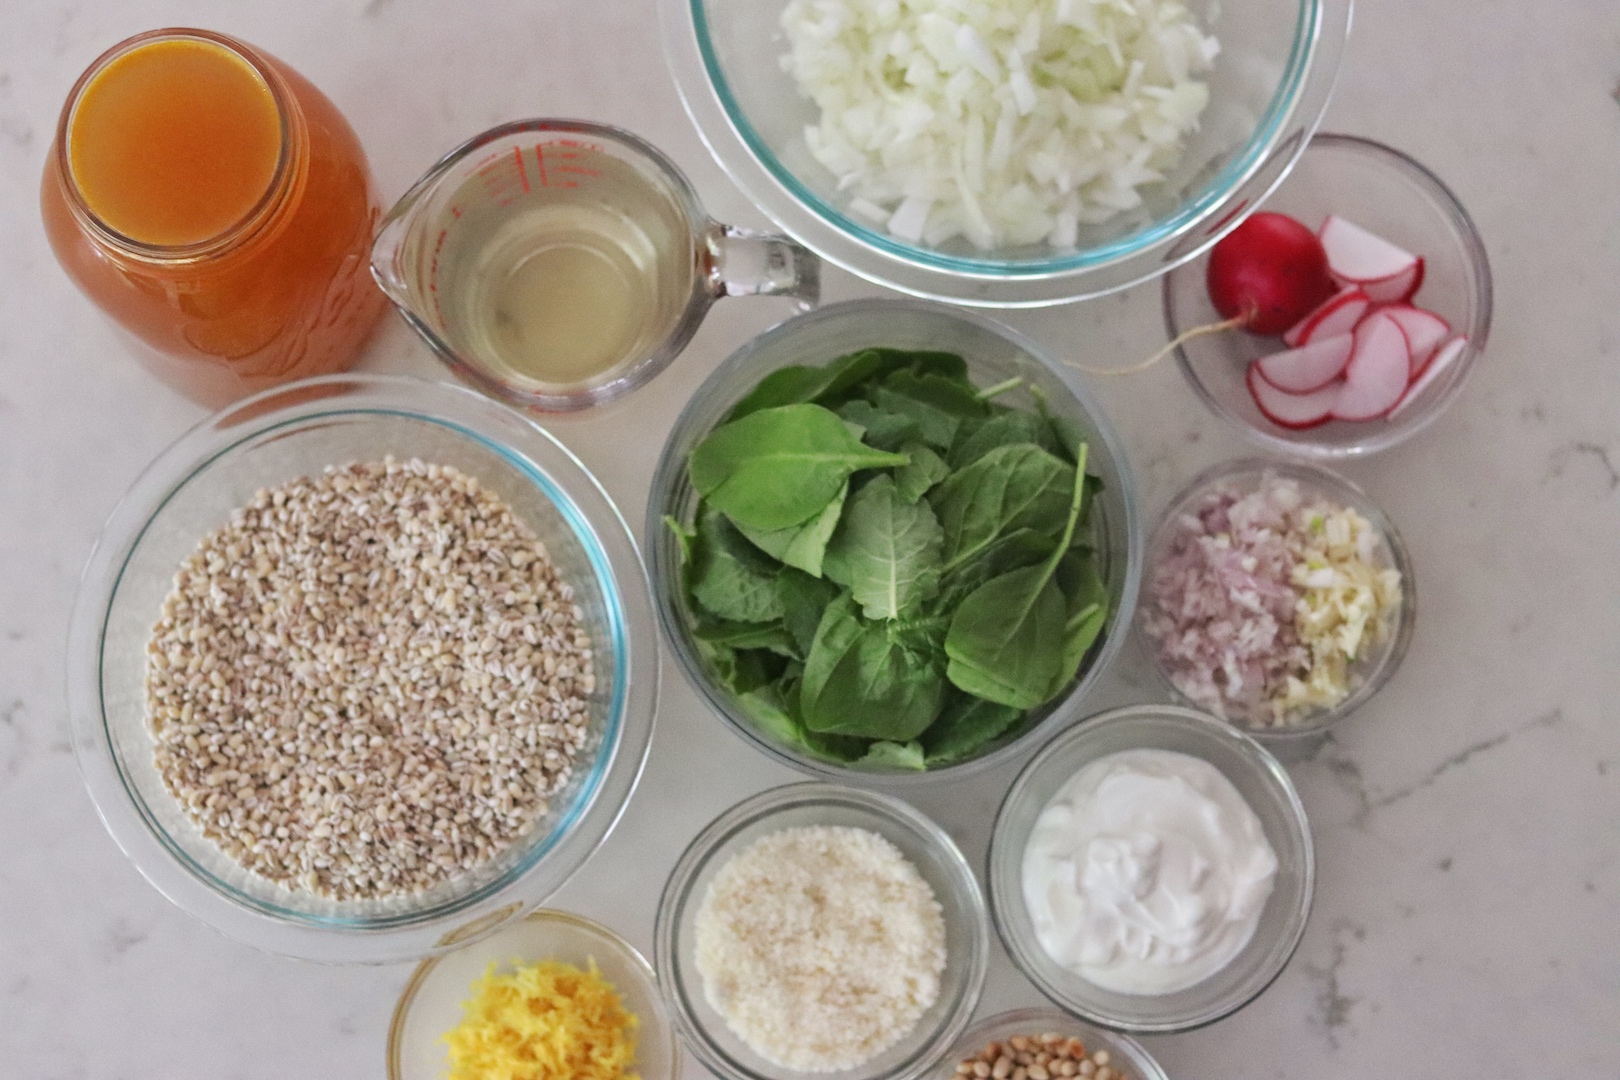 All ingredients for Instant Pot Barley Risotto 